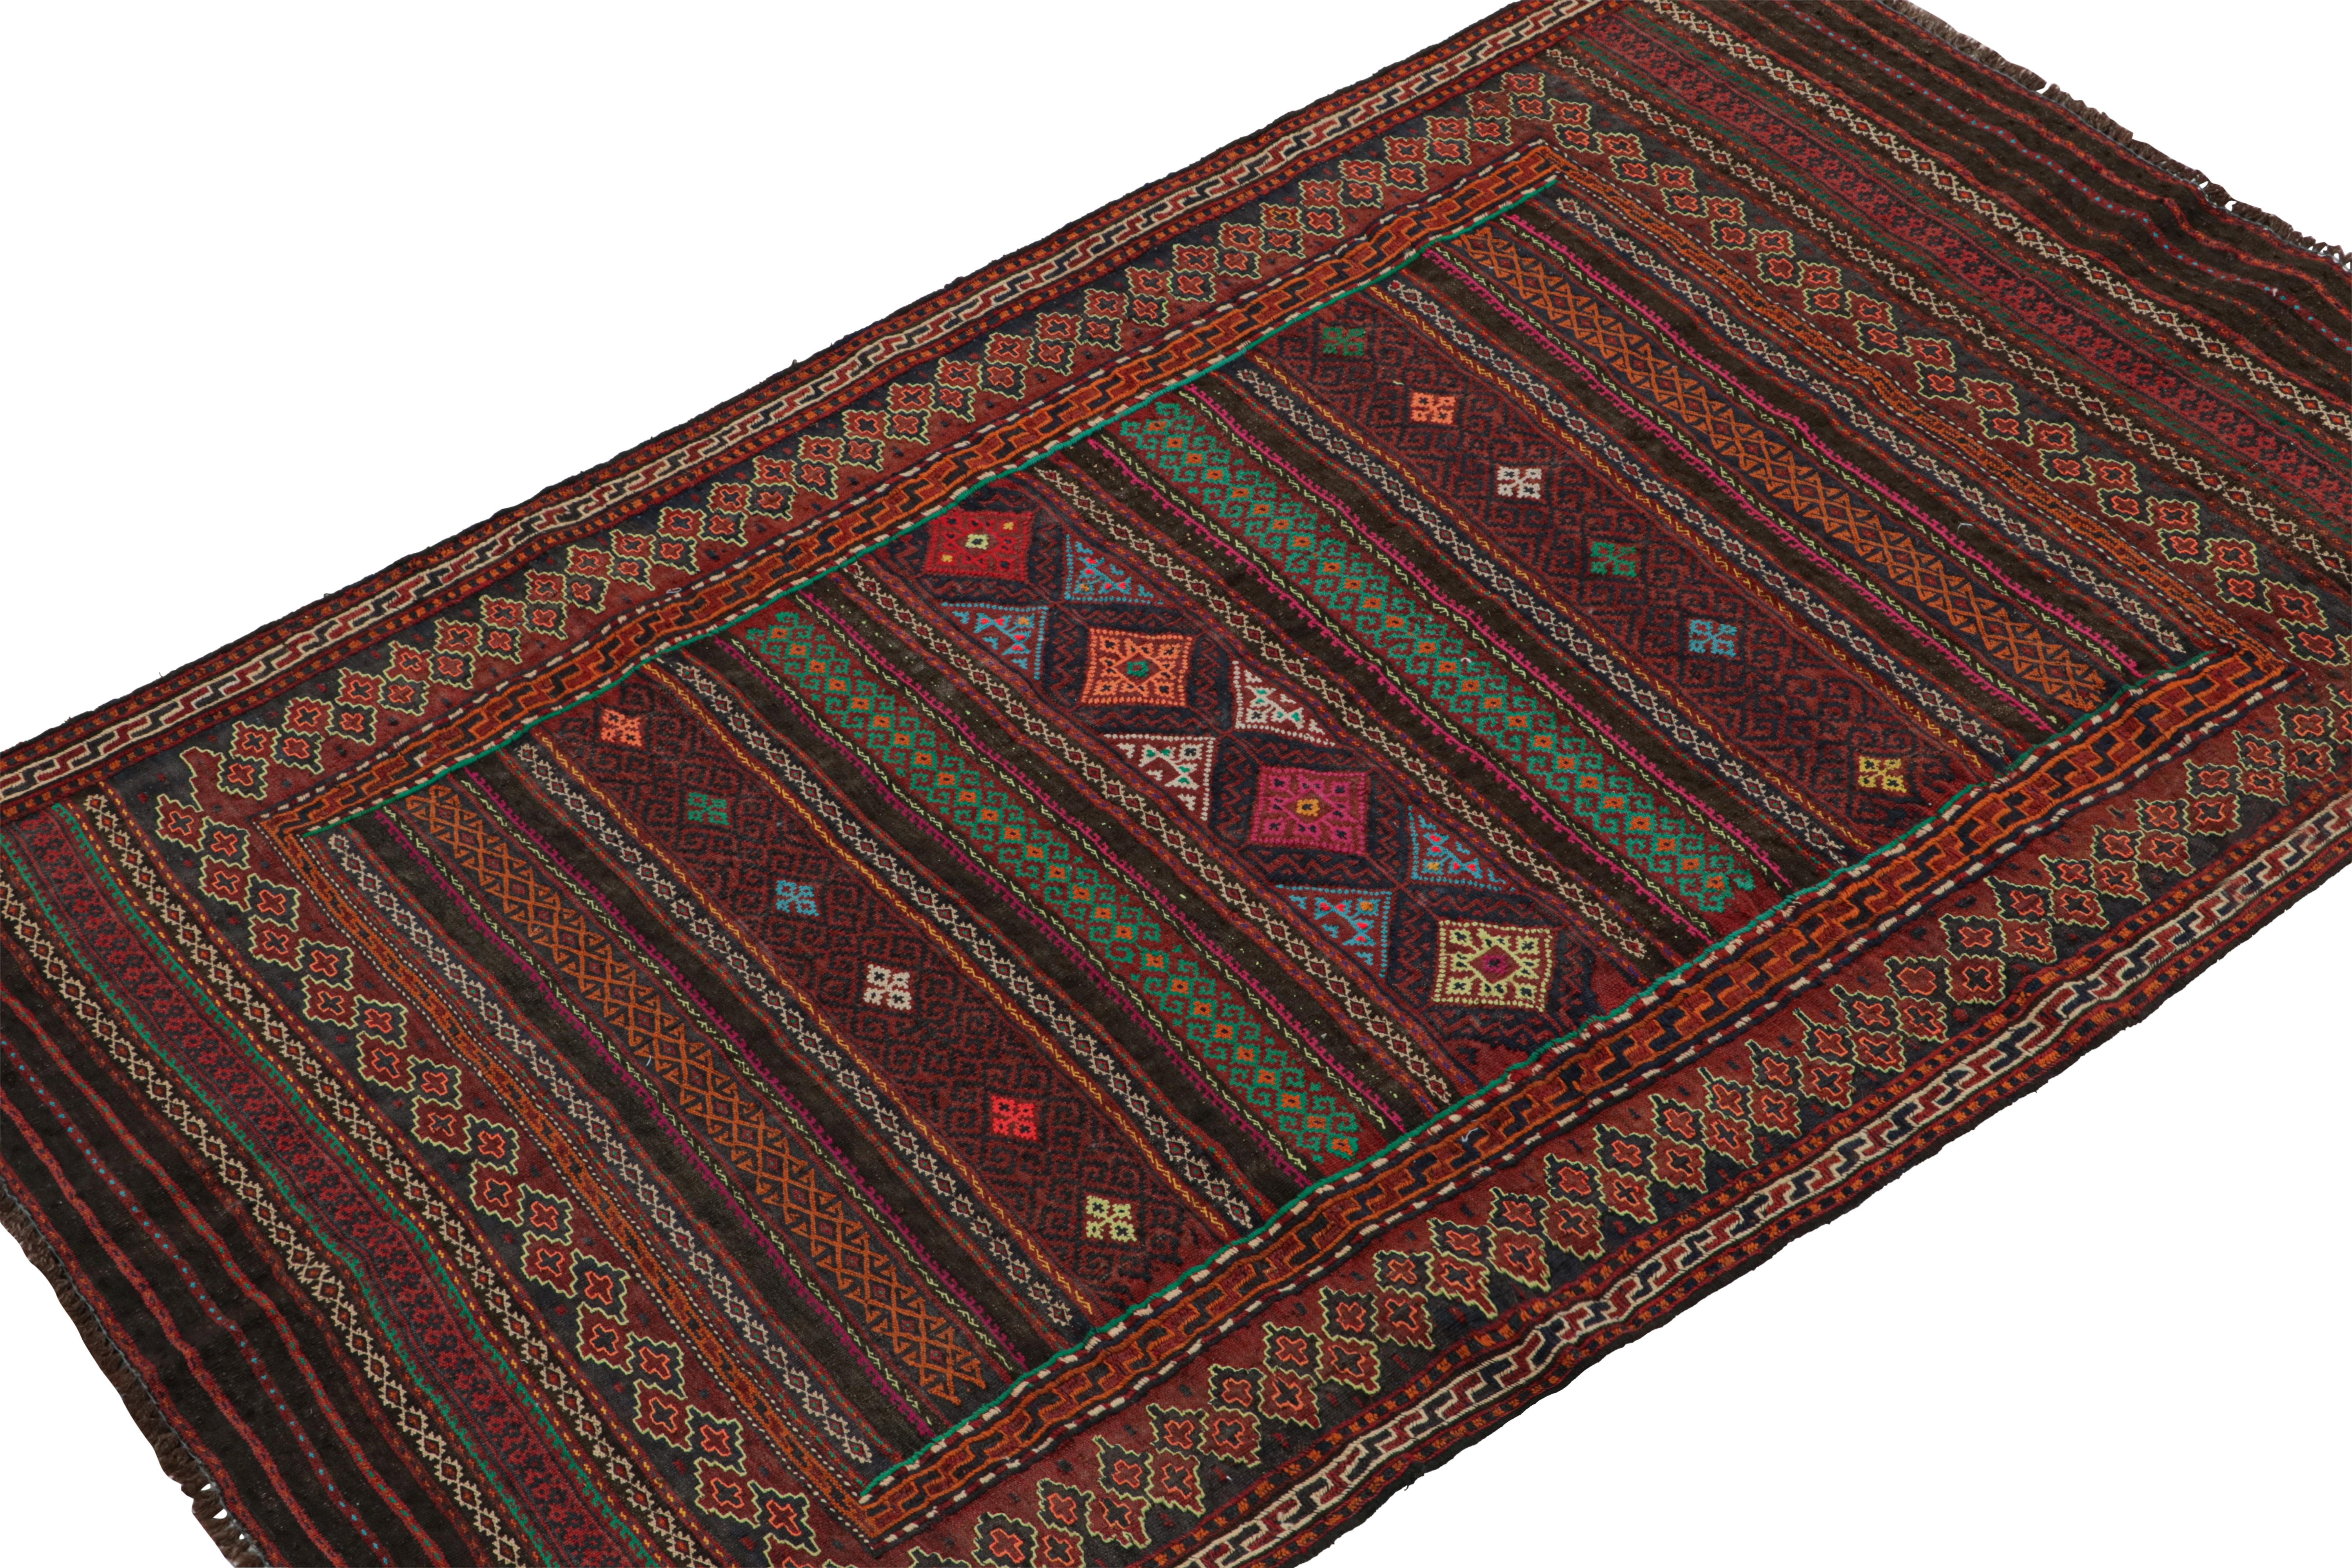 Handwoven in wool circa 1950-1960,  this 4x6 vintage Baluch Kilim  is a new curation from Rug & Kilim’s primitivist flatweaves. 

On the Design:

Specifically believed to hail from the Leghari clan of this nomadic people, this tribal rug enjoys rich